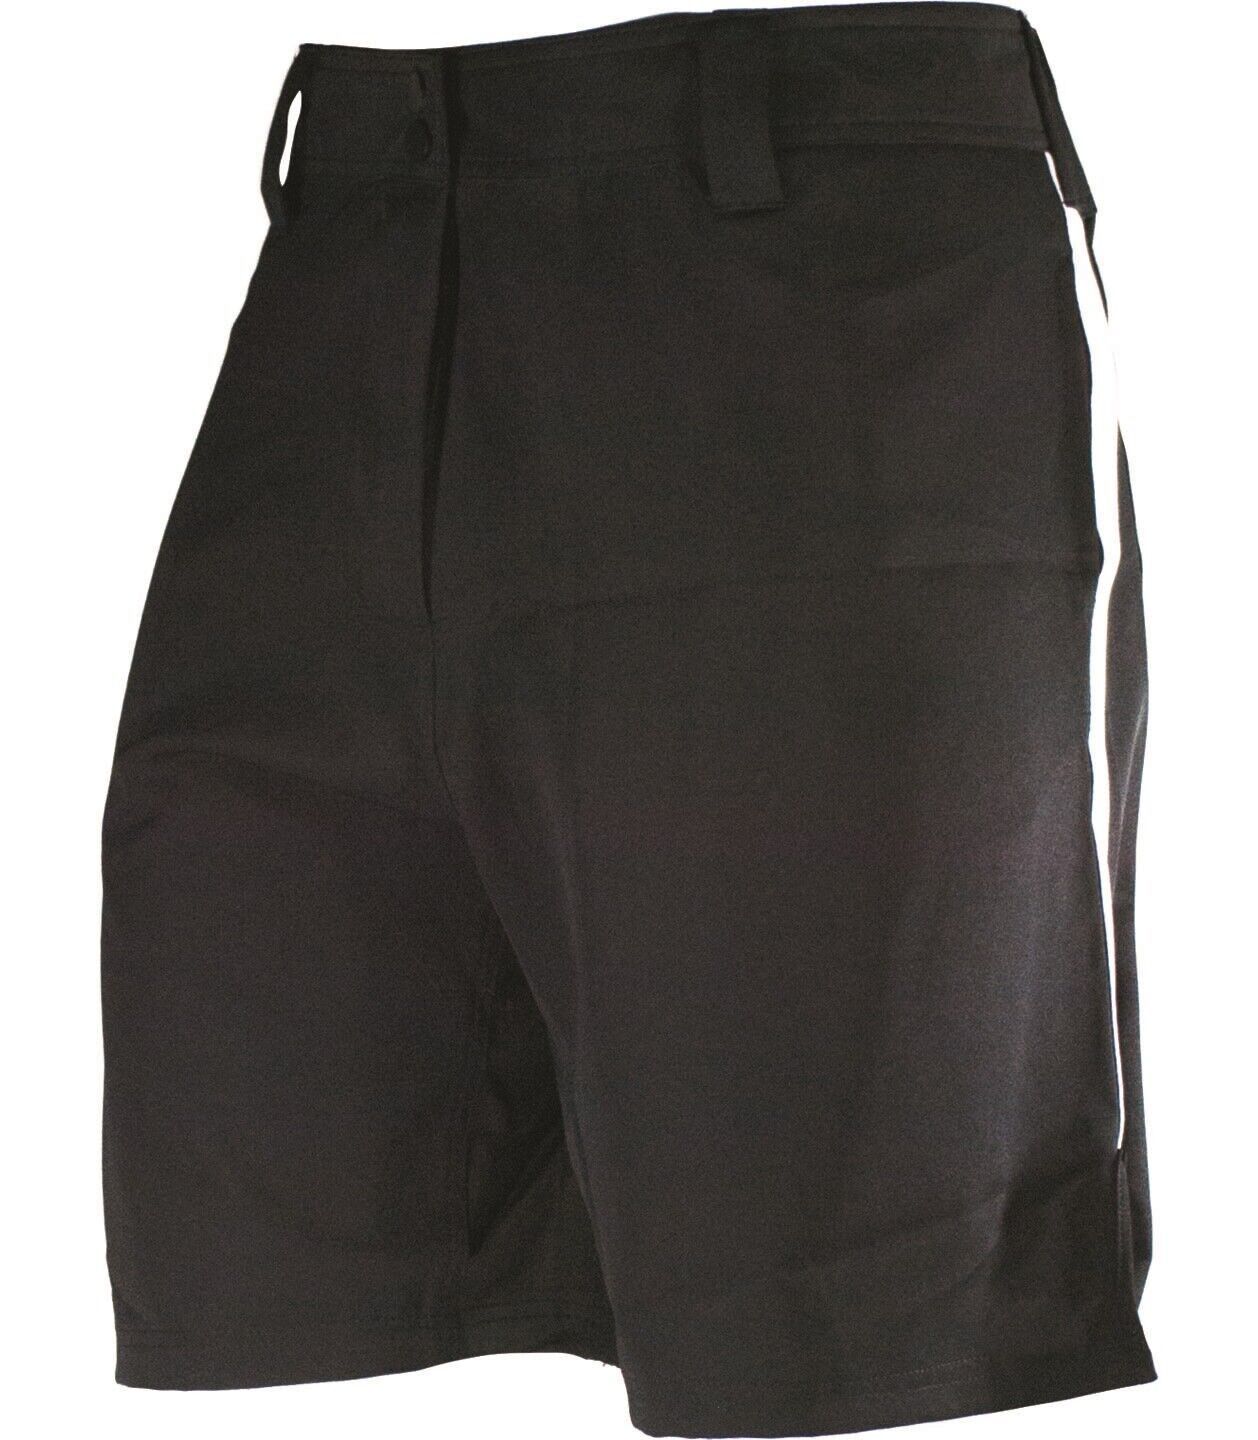 Primary image for Cliff Keen | K1865 | Professional Football Referee Shorts | Official's Choice!